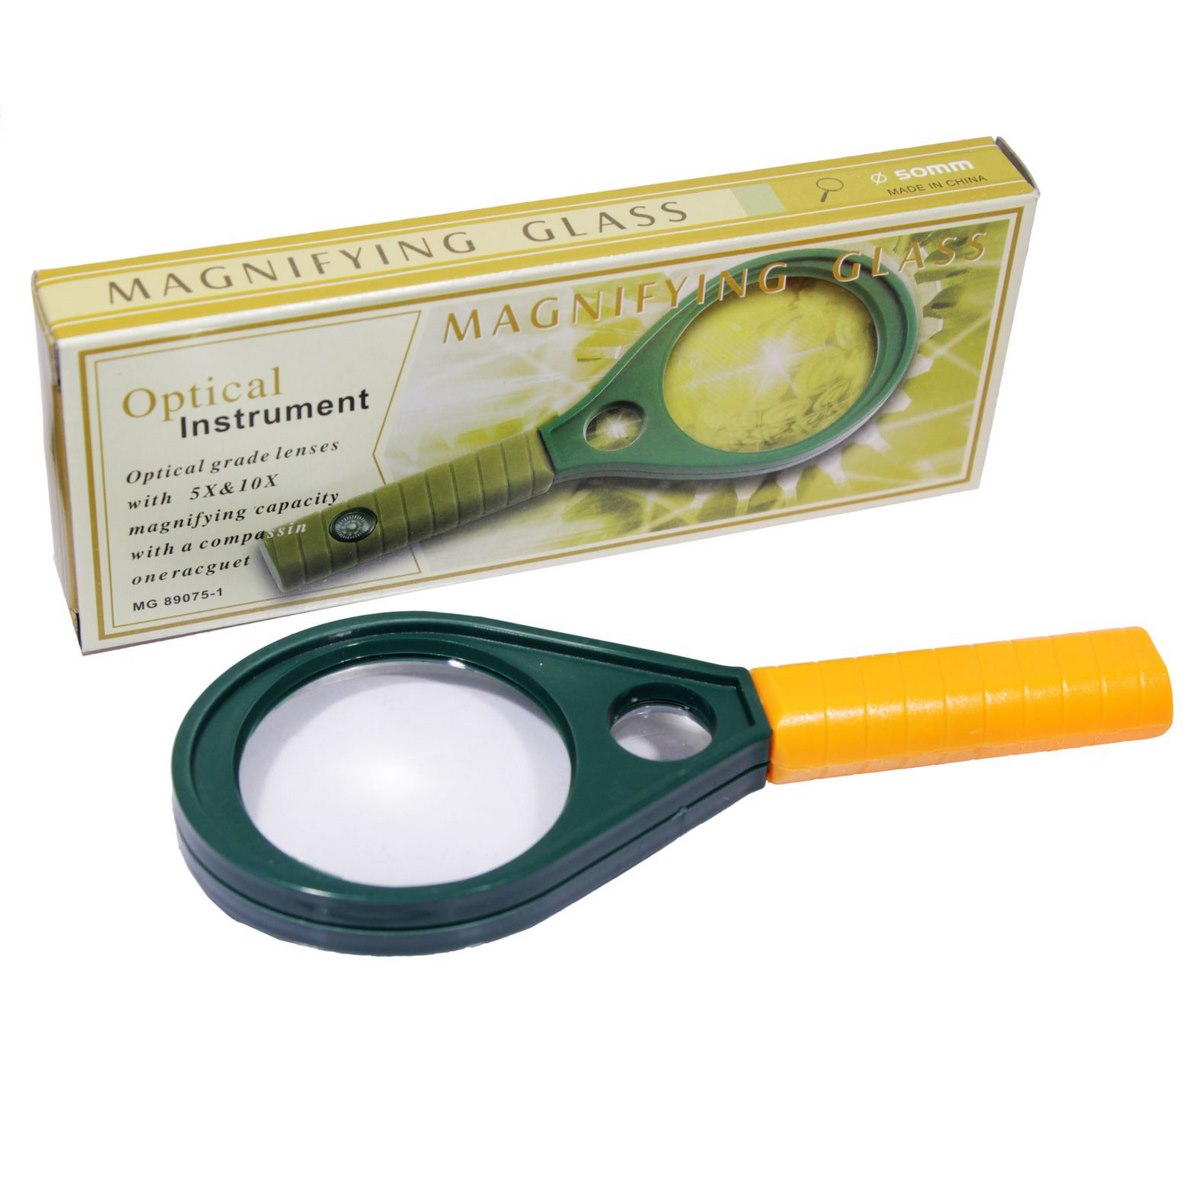 Magnifying Glass 65mm - For Office Use, Students, Professionals, Personal Use, Corporate Gifting, Return Gift JAMG89075